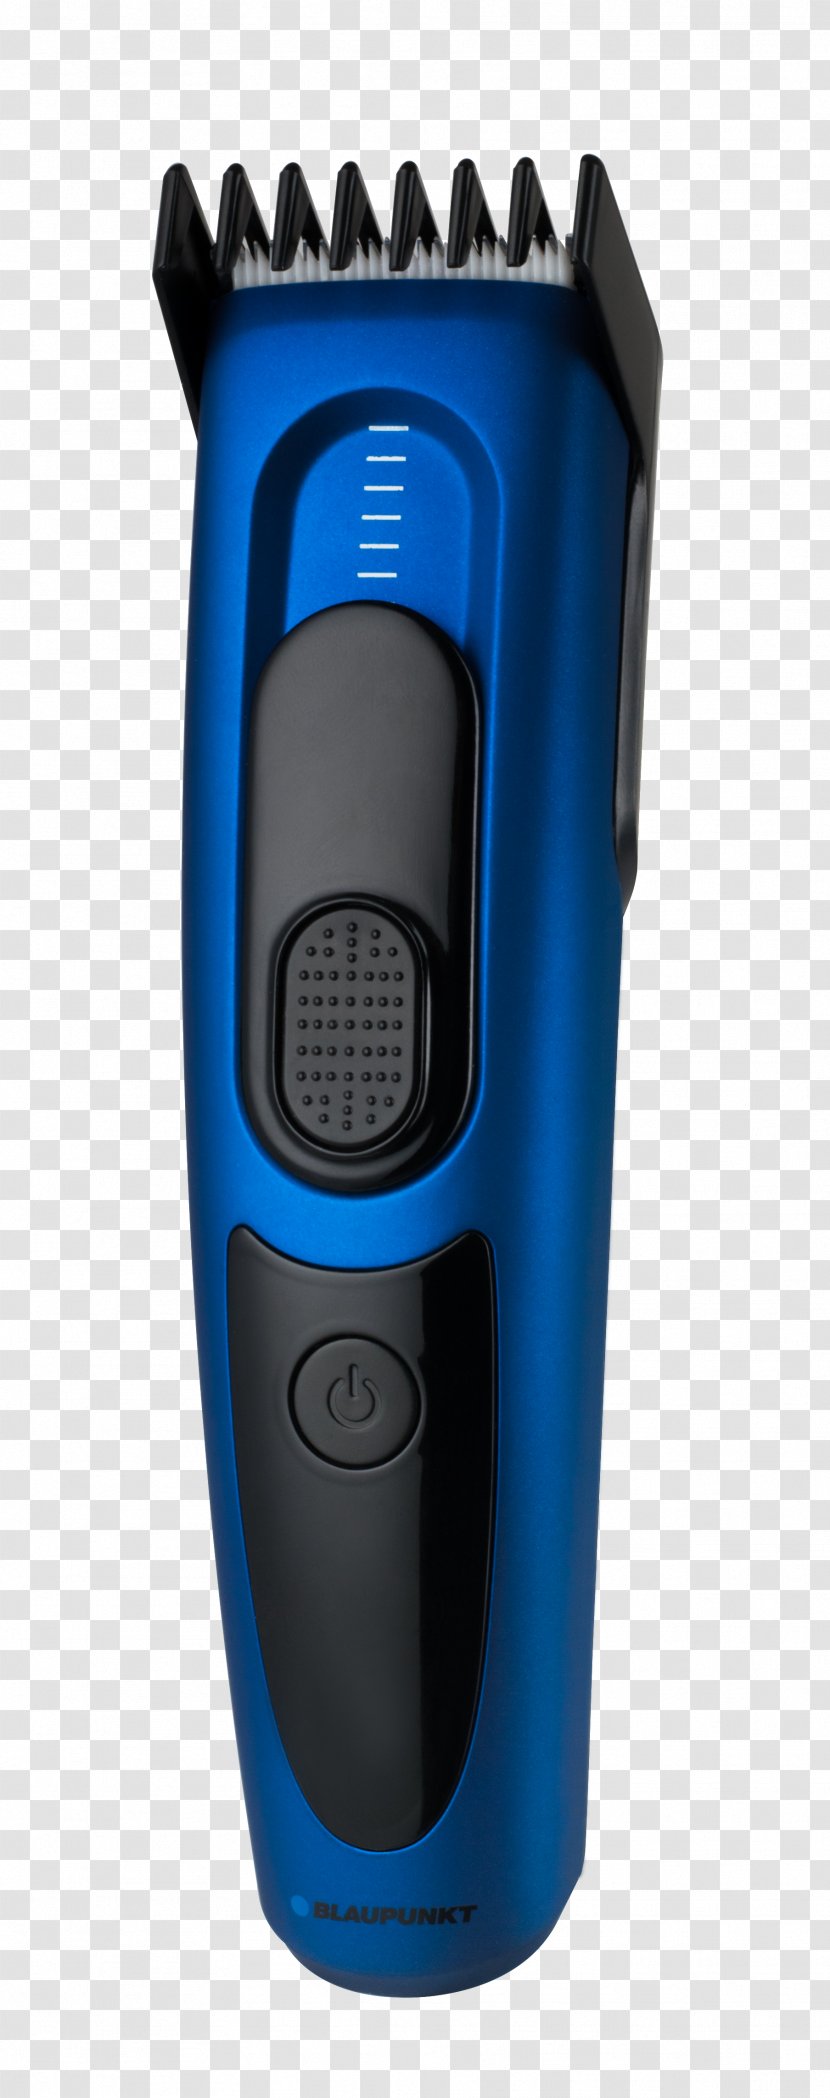 Hair Clipper Blaupunkt Electric Razors & Trimmers Hyundai Motor Company Remington BHT2000A - Philips - Supplies On The Side Transparent PNG